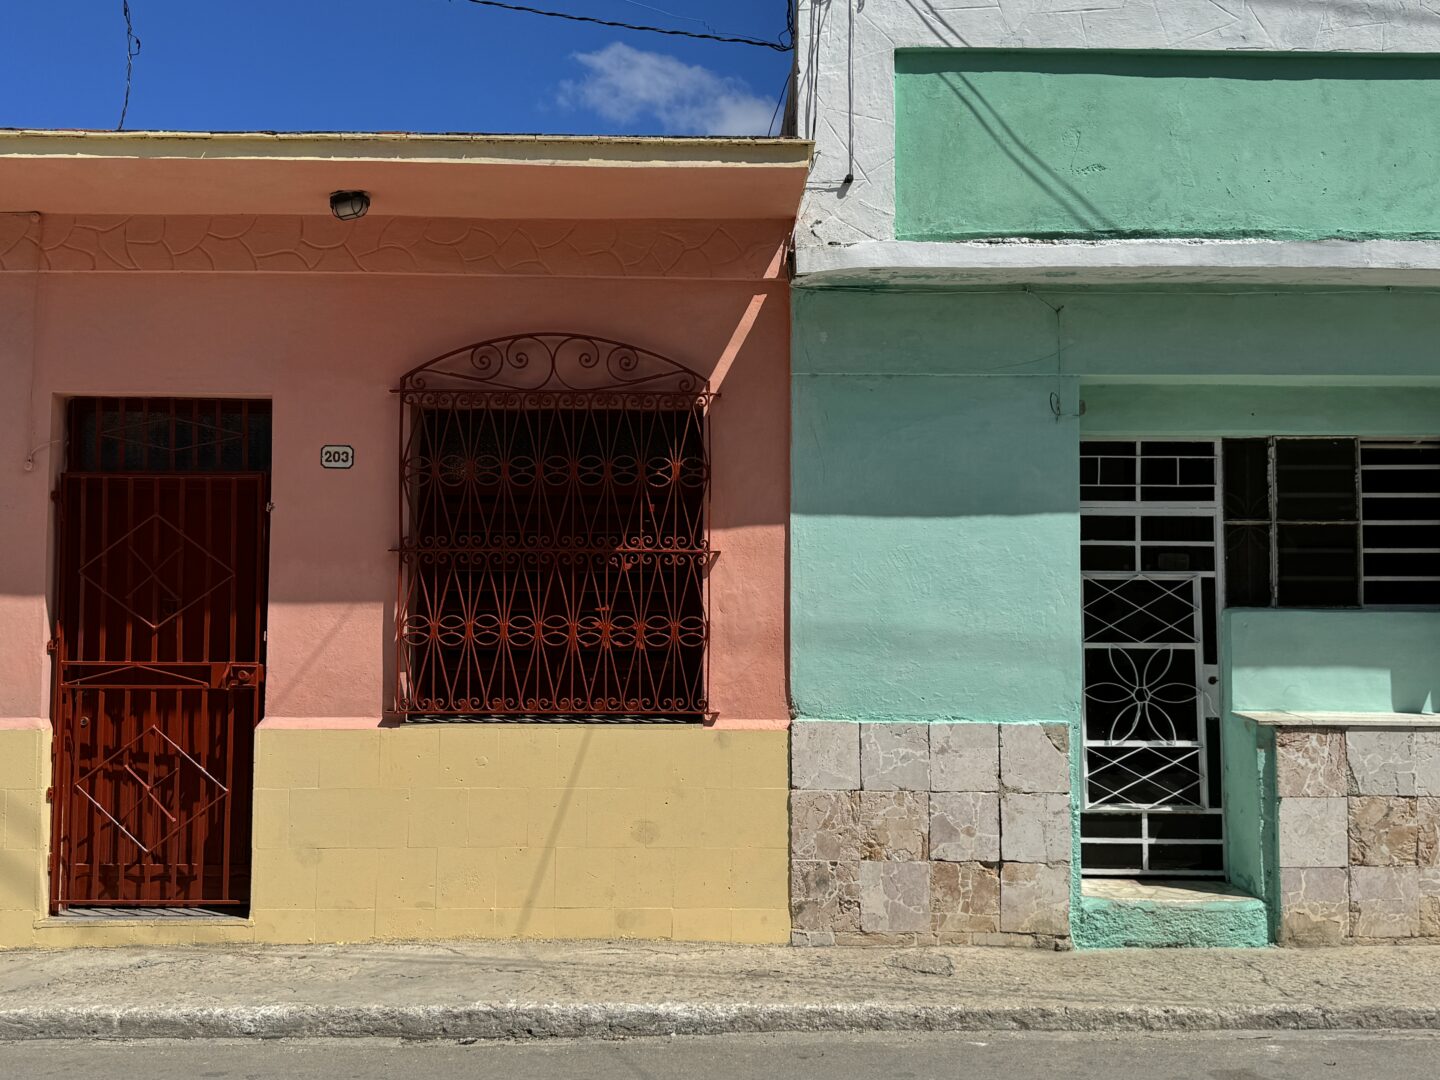 View of Regla town in Havana, Cuba featuring a colorful facade and entryways for local houses by Carol Schiraldi of Carol's Little World for Opportunity List. 